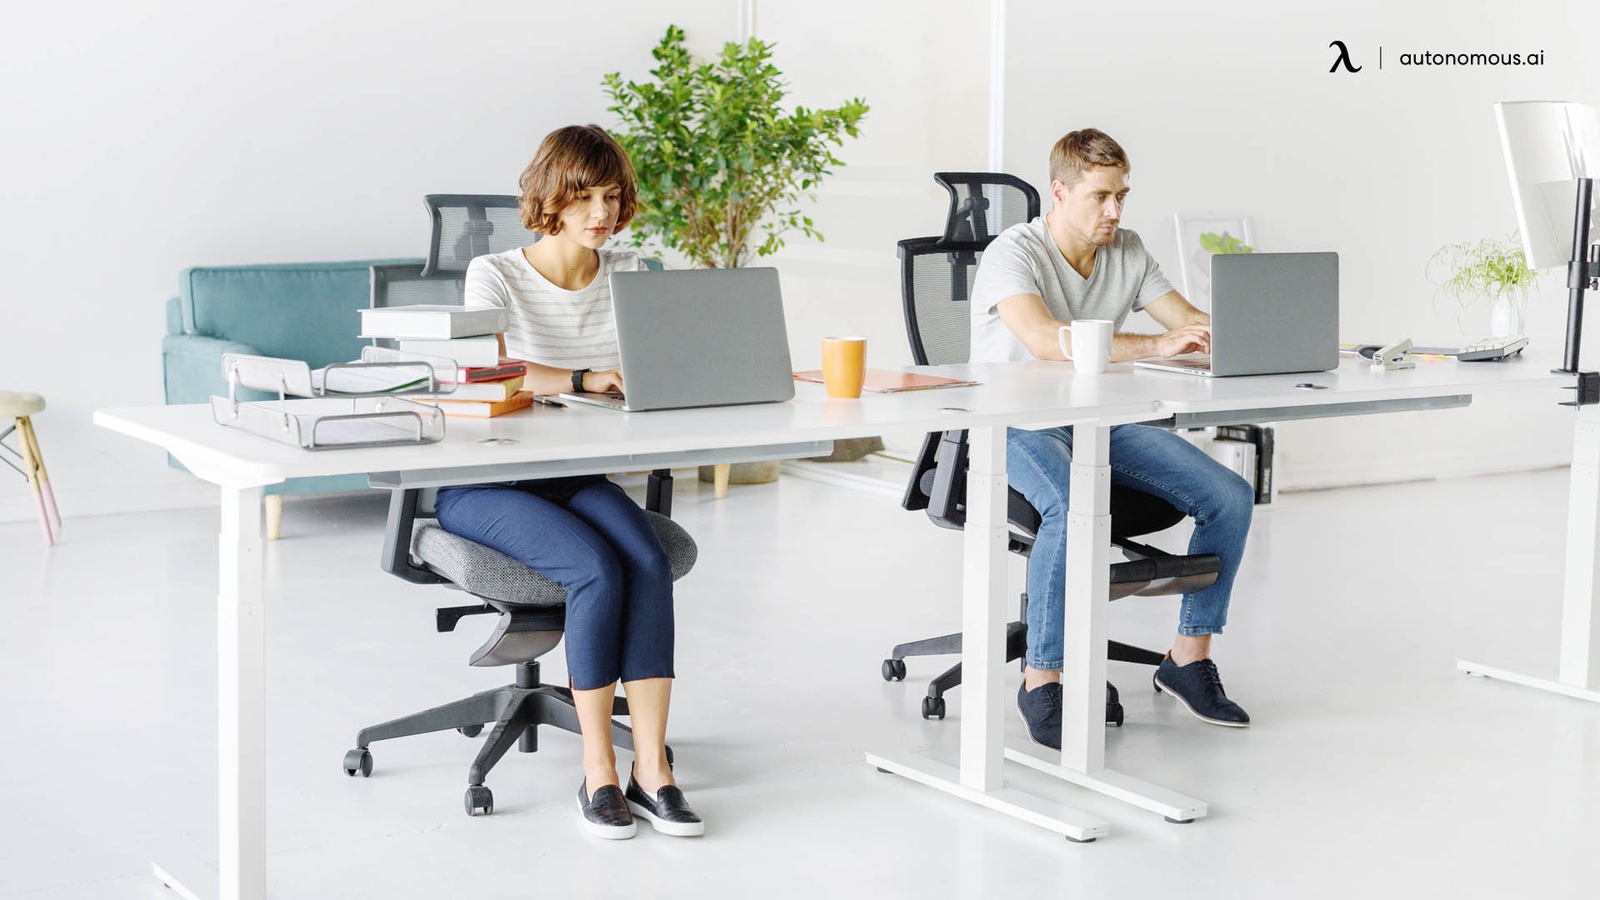 10 Best Ergonomic Chair in Australia: Top Seat Choices for 2023